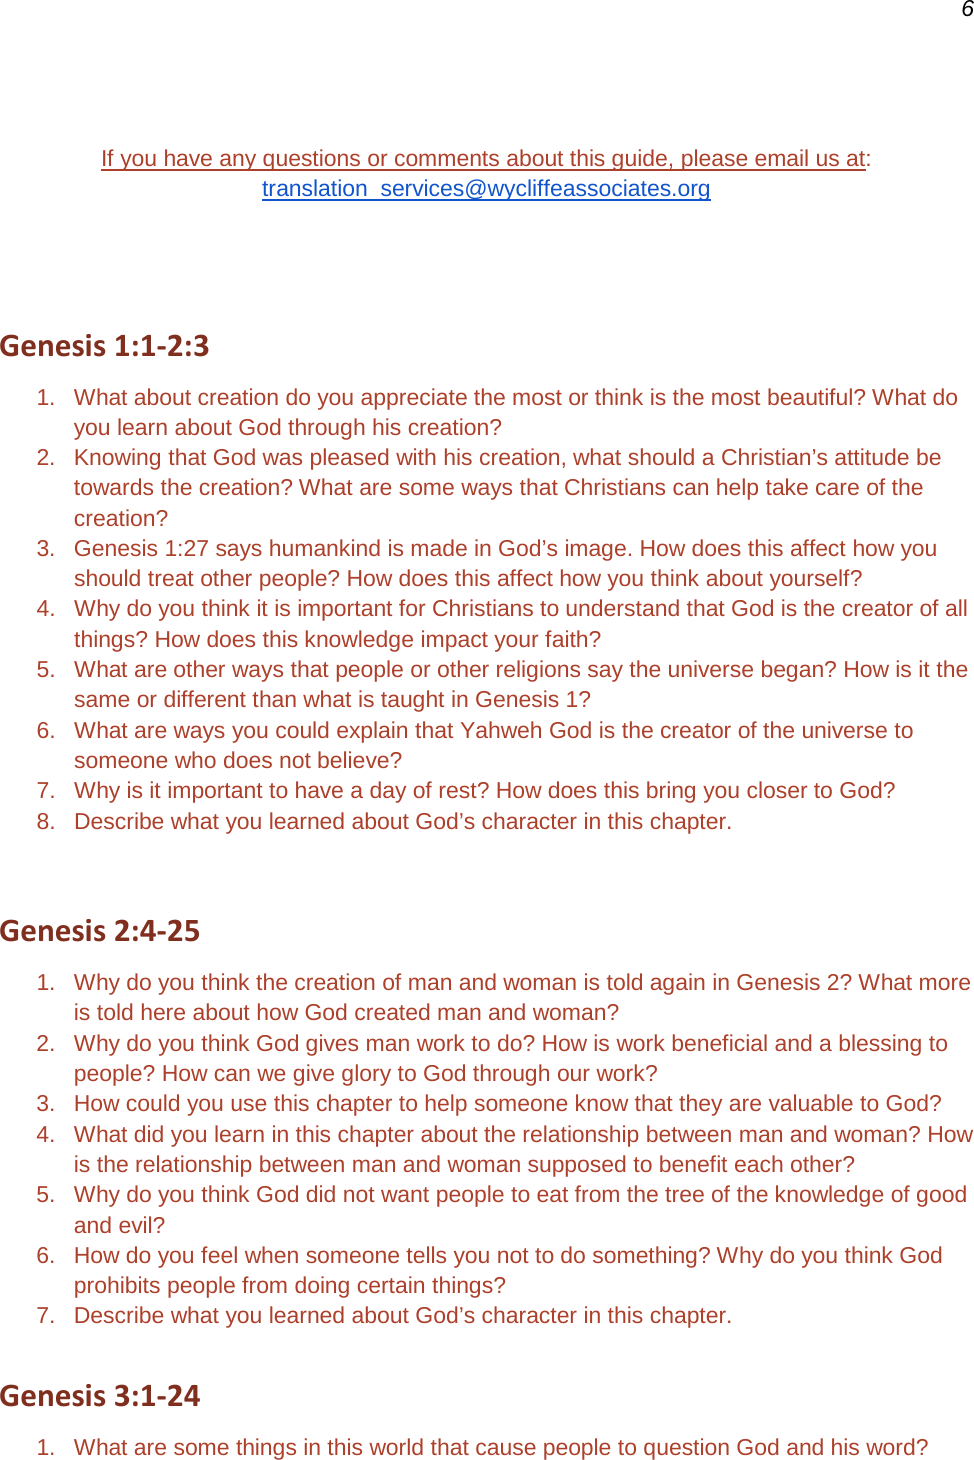 Page 6 of 9 - 4. Application Guide For Genesis